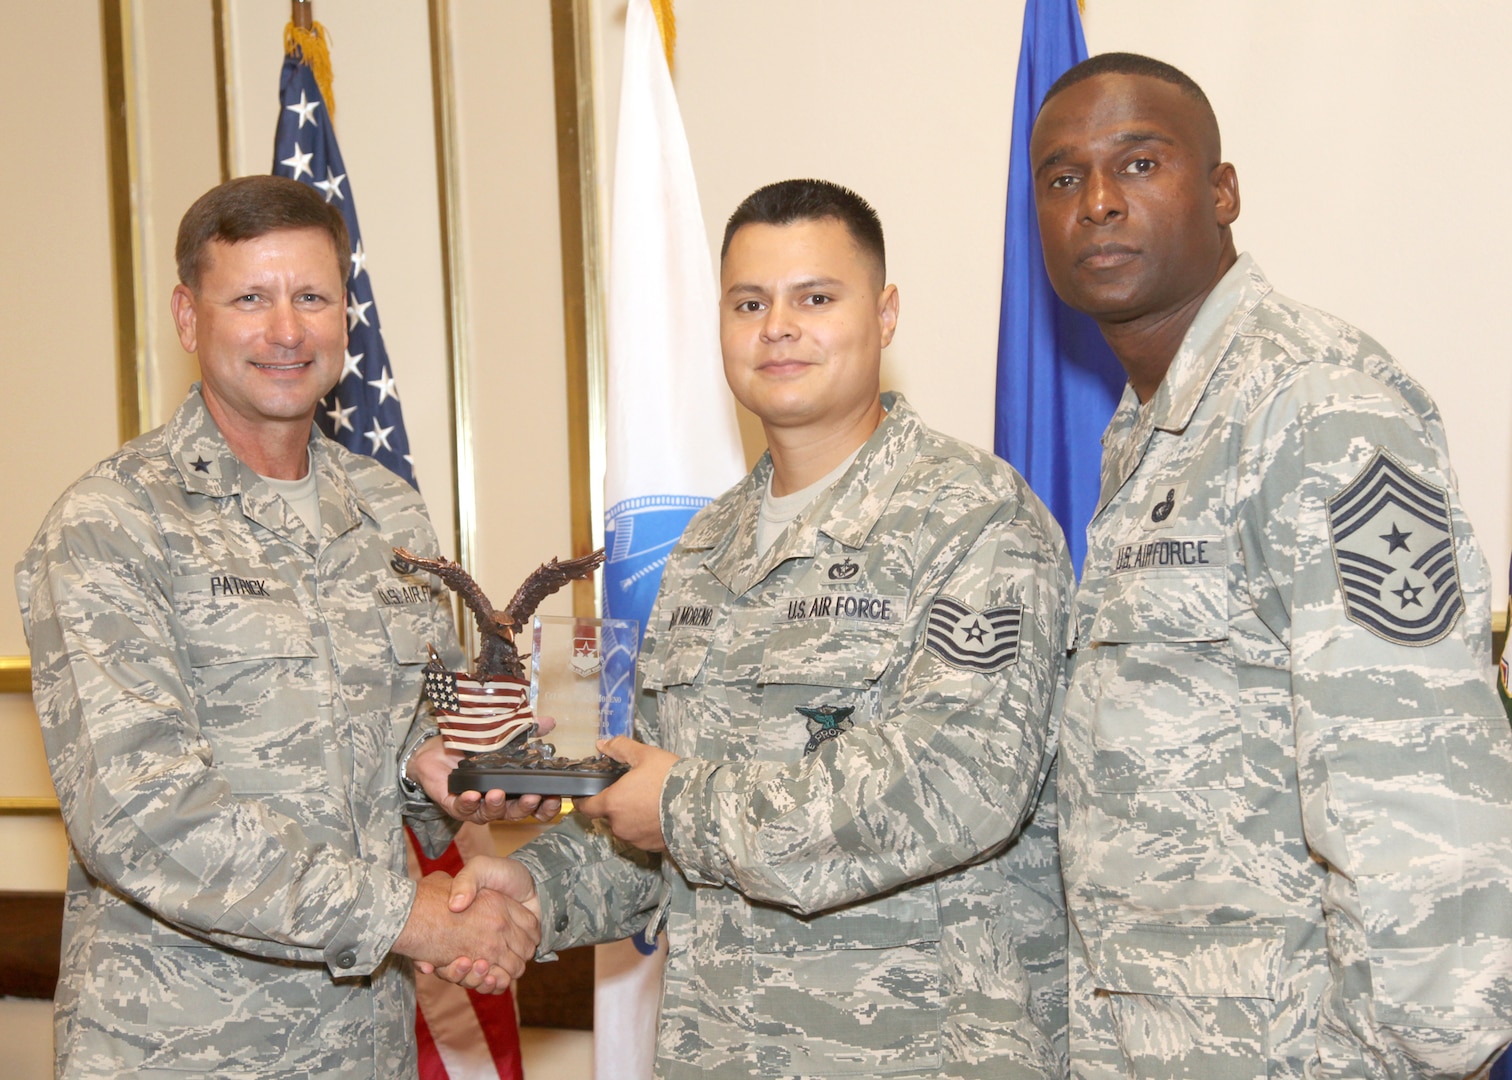 Tech. Sgt. Aguilar Moreno receives the NCO of the Quarter award from Brig. Gen. Leonard Patrick, 502nd Air Base Wing commander, and Chief Master Sgt. Juan Lewis, 502nd ABW command chief, during the 502nd ABW second quarter awards luncheon July 27 at the Kelly Club. Sergeant Moreno is with the 902nd Civil Engineer Squadron. (U.S. Air Force photo/Robbin Cresswell) 